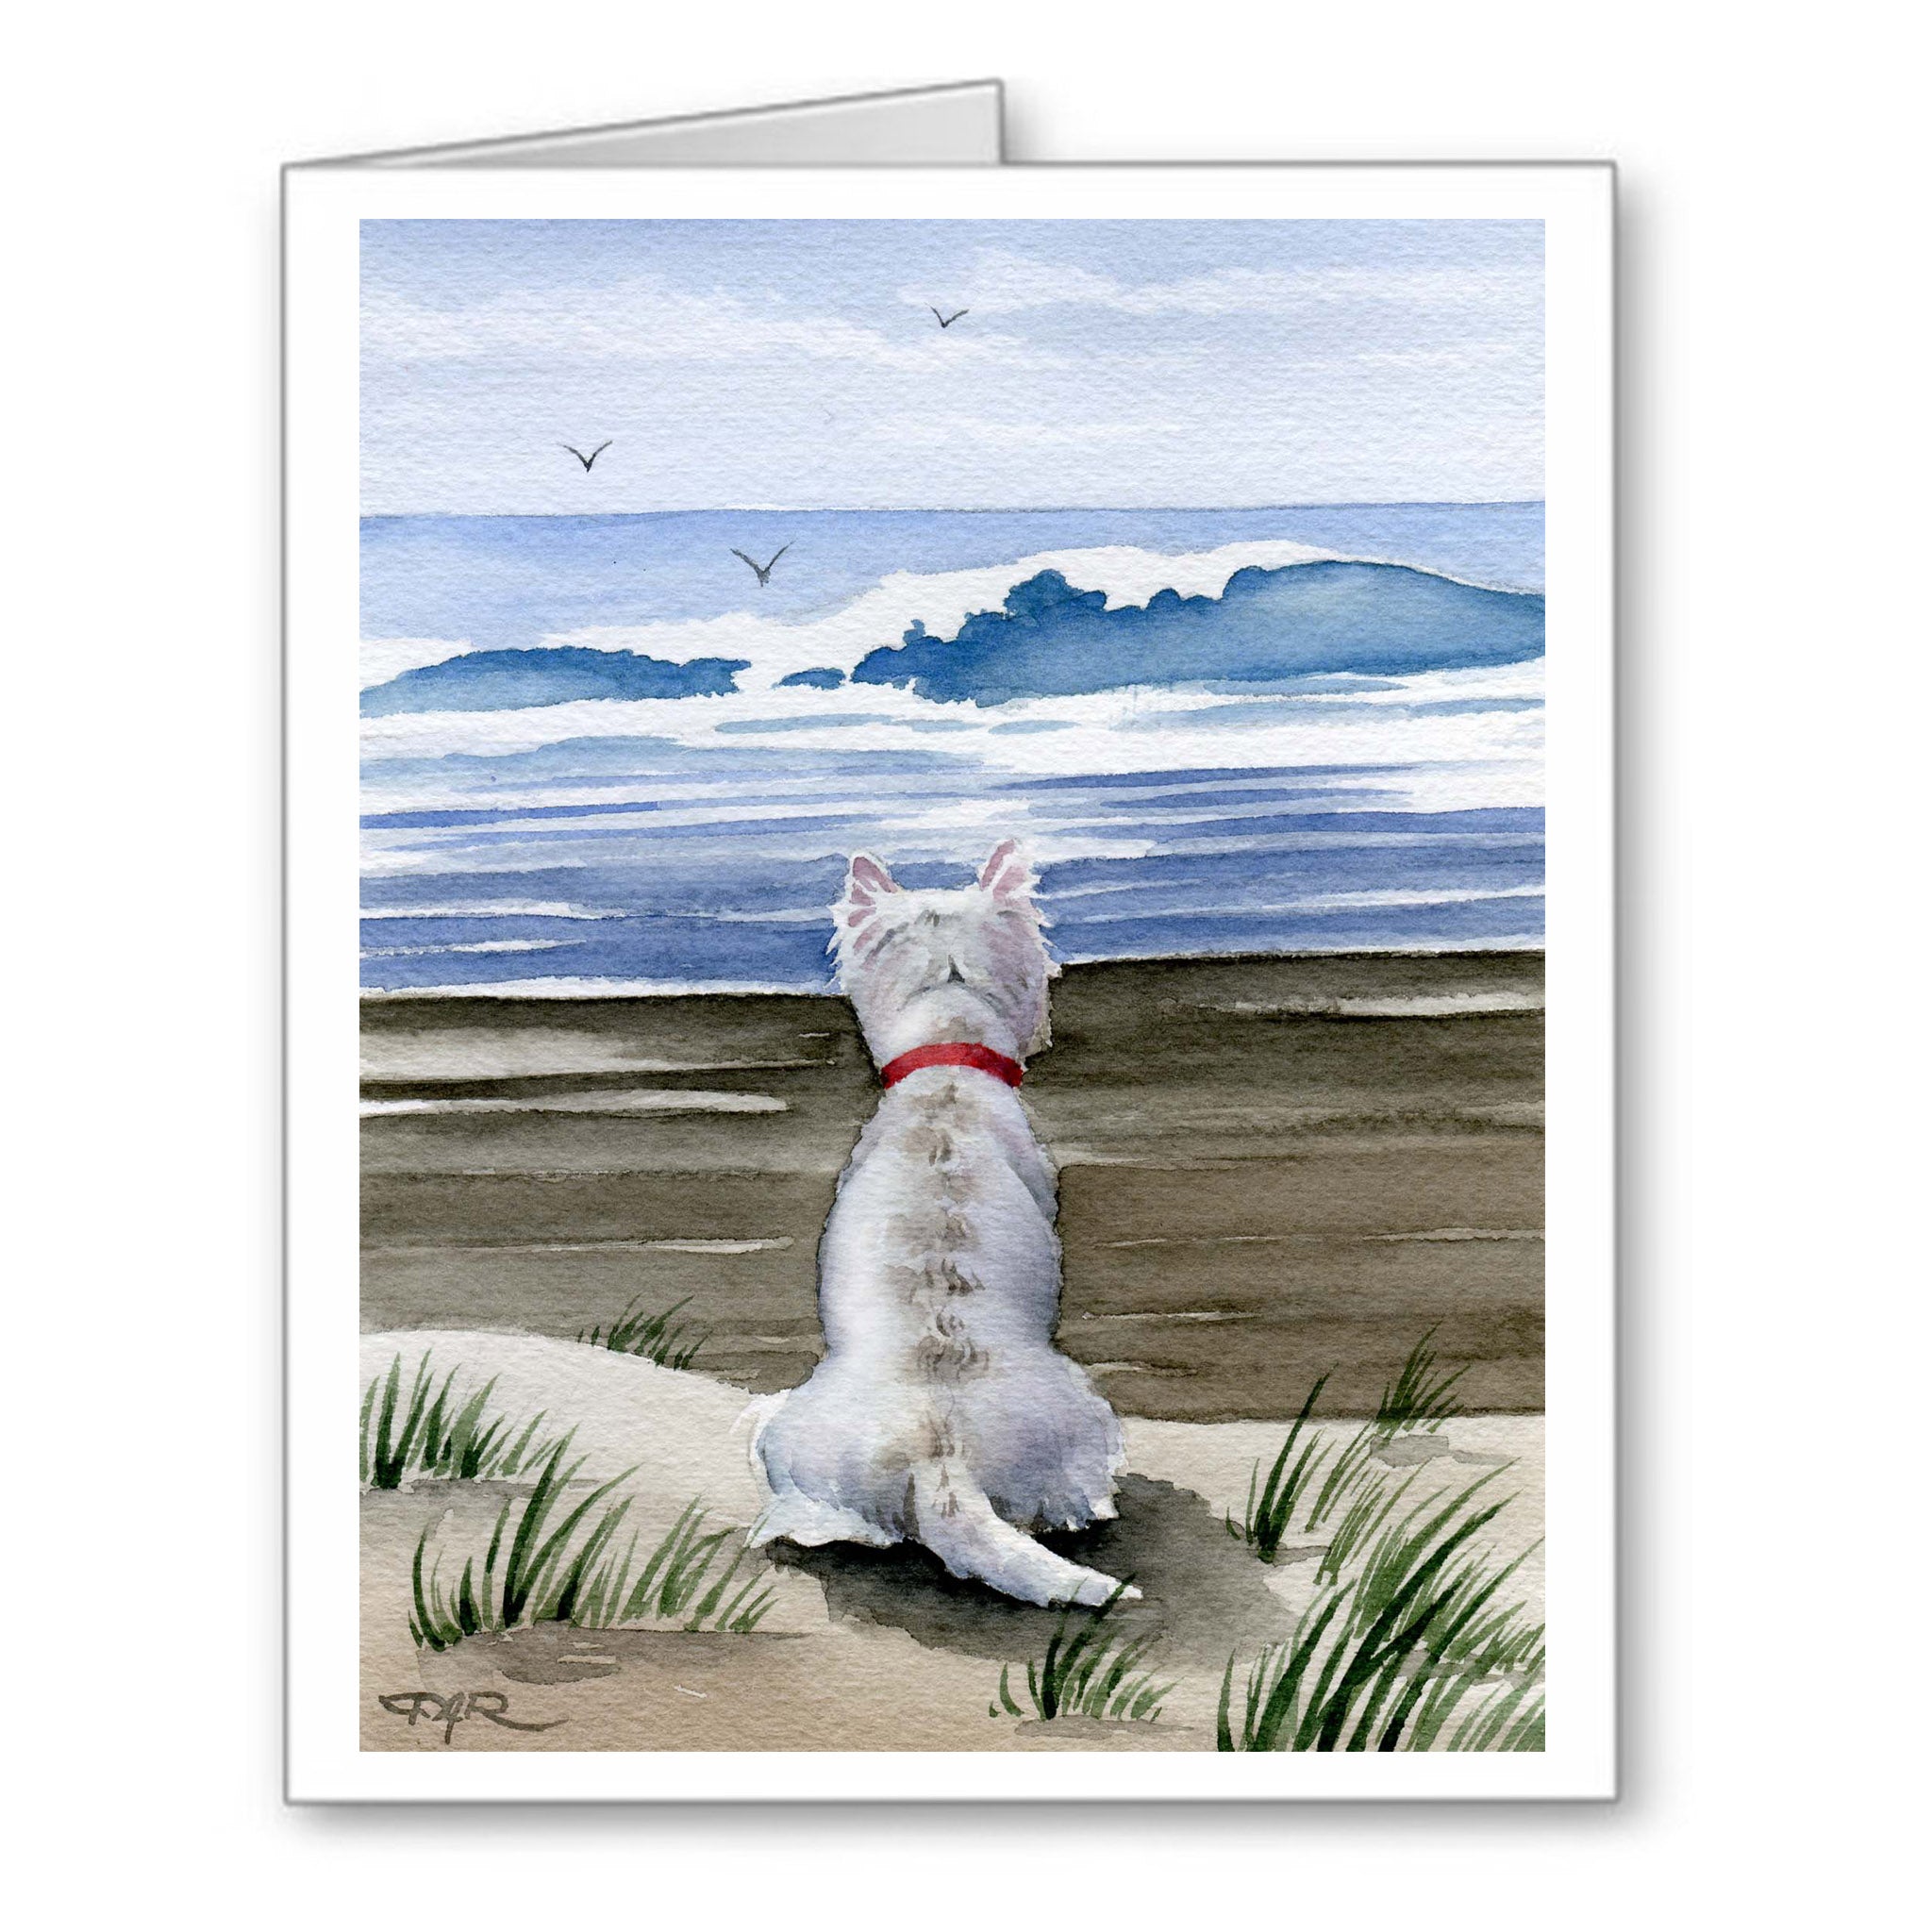 West Highland Terrier Watercolor Note Card Art by Artist DJ Rogers